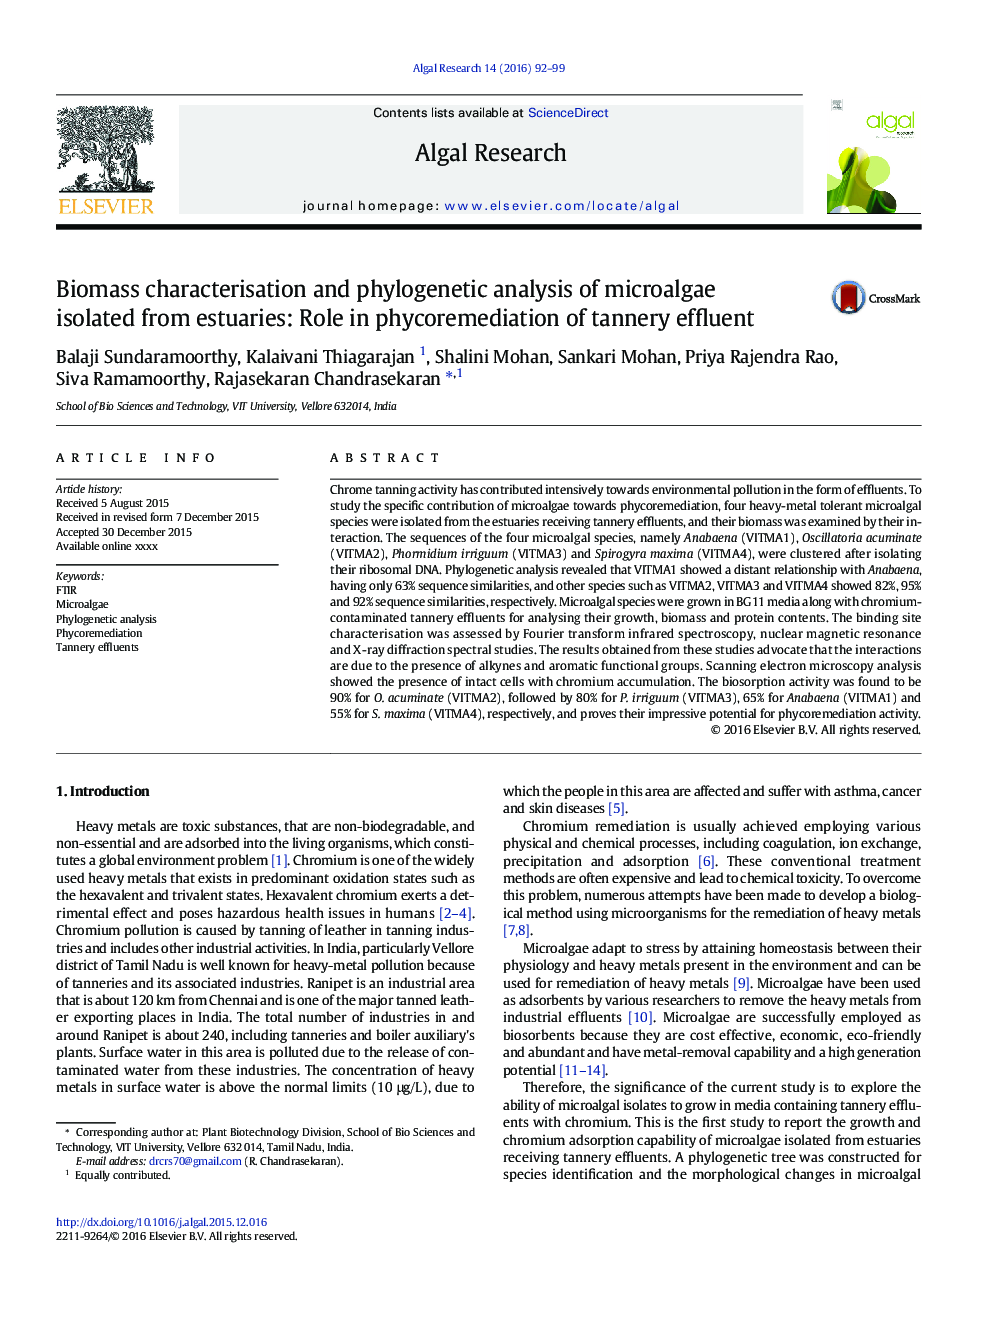 Biomass characterisation and phylogenetic analysis of microalgae isolated from estuaries: Role in phycoremediation of tannery effluent